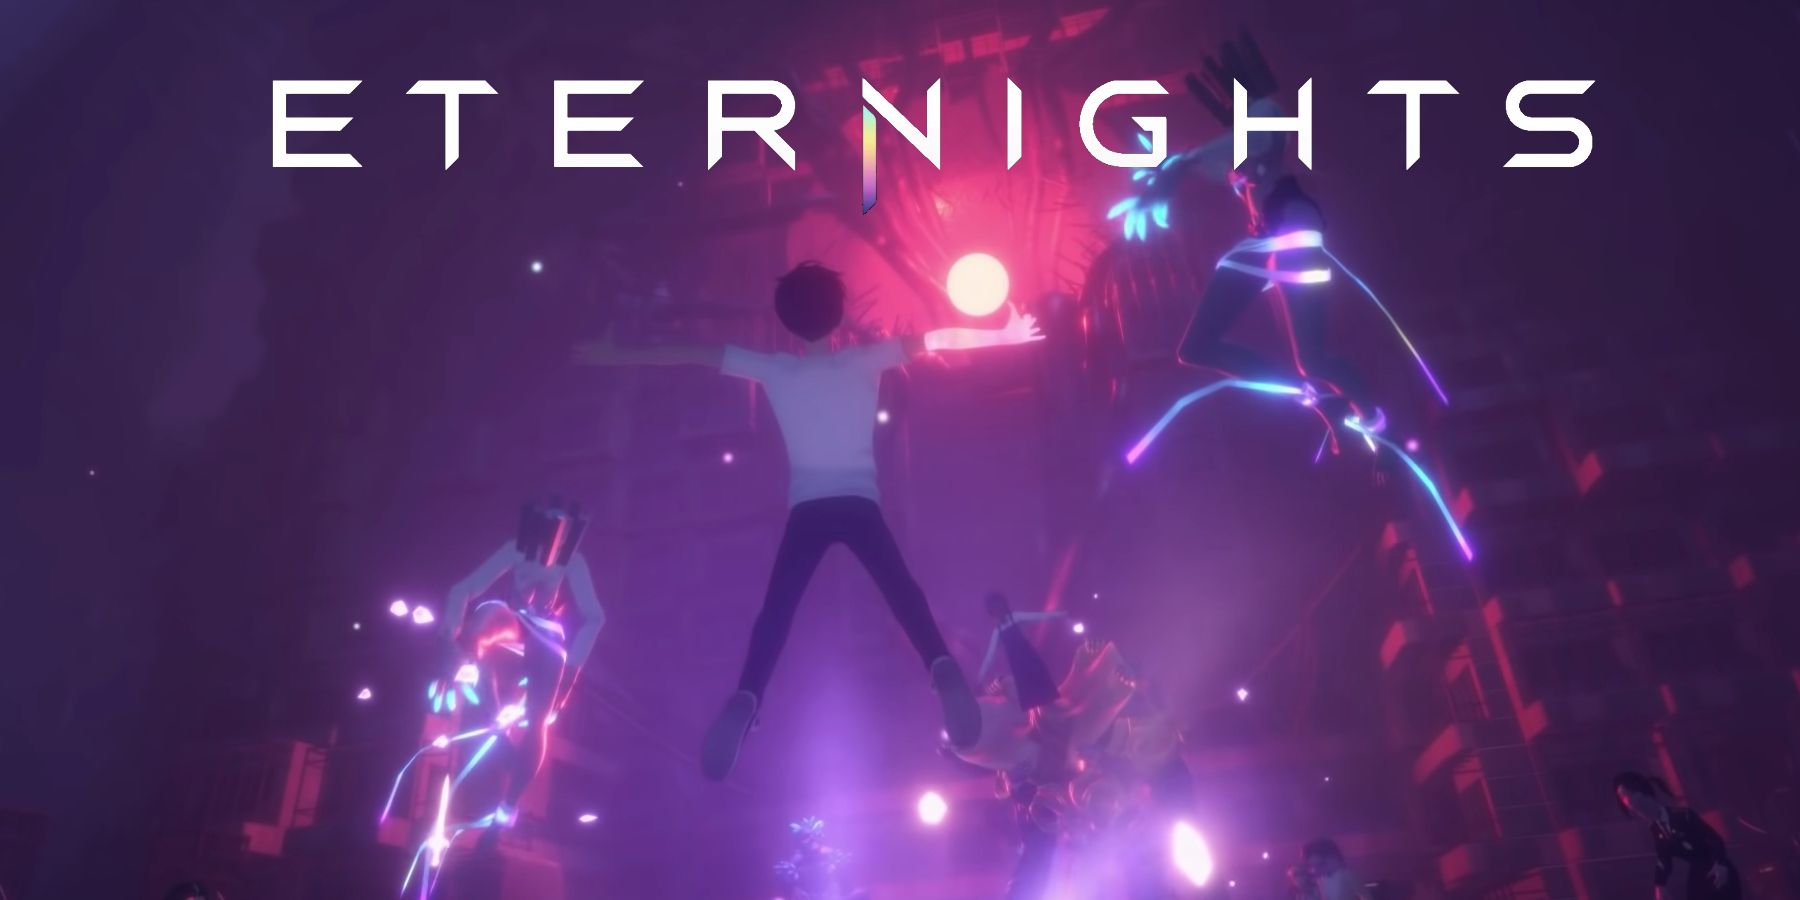 download the new for android Eternights